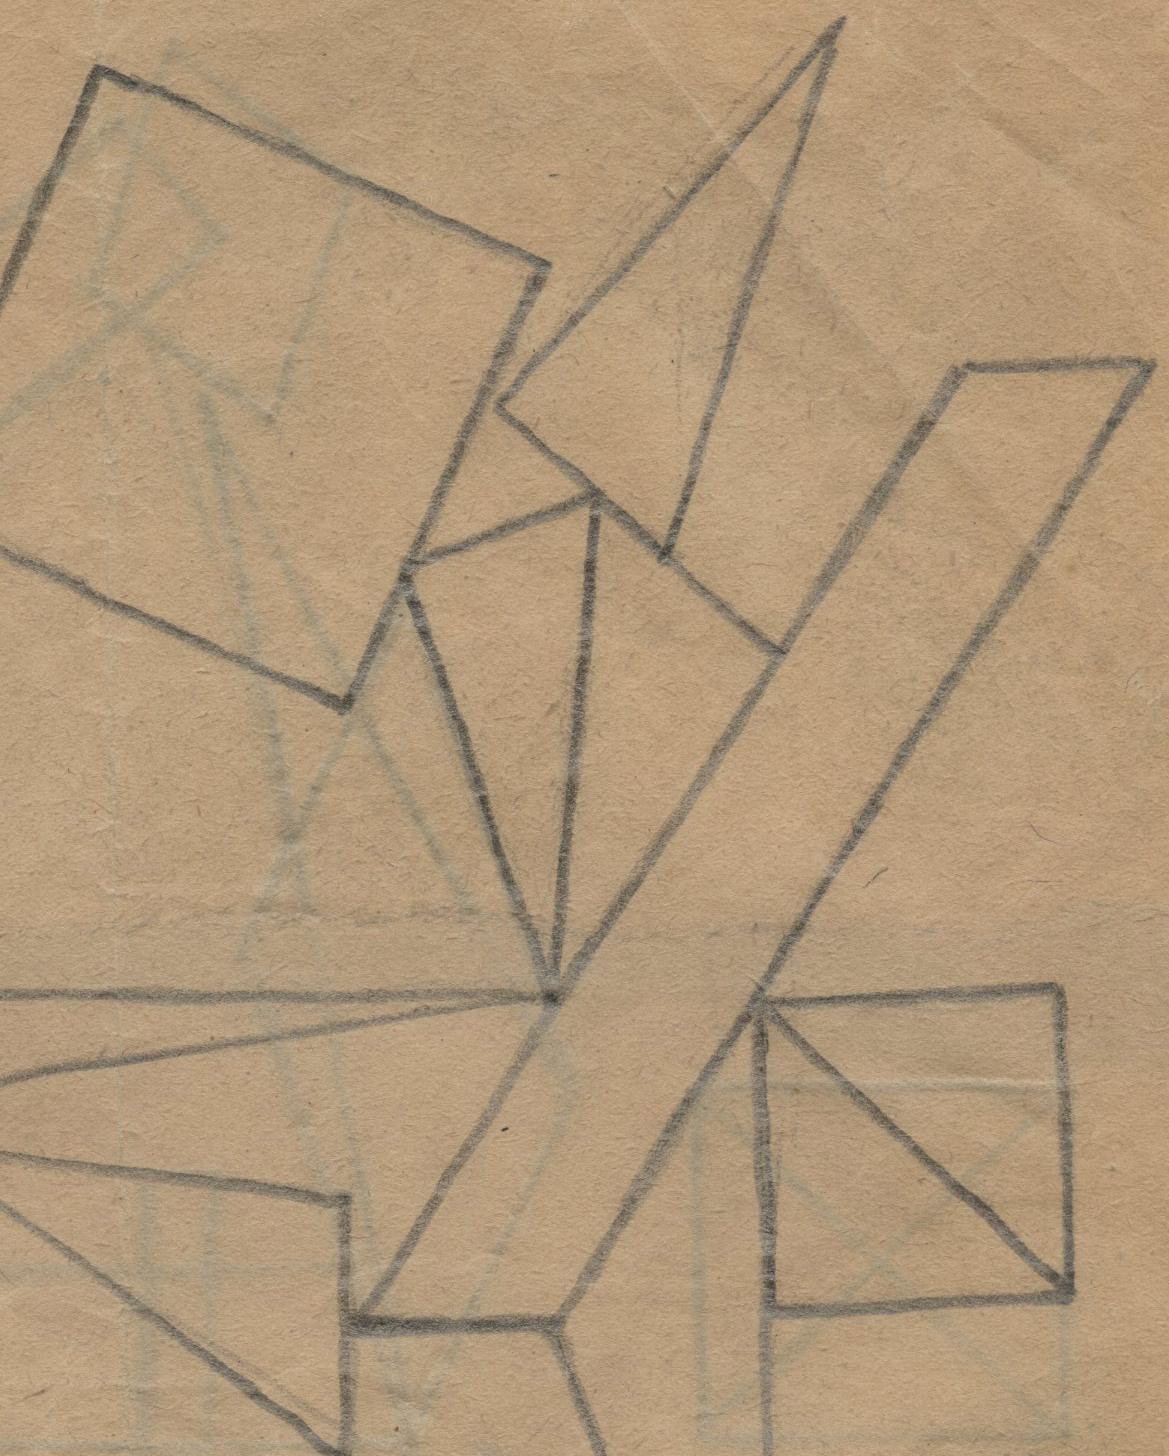 Non-Objective Drawing (Double sided composition) - Abstract Art by Rudolf Bauer